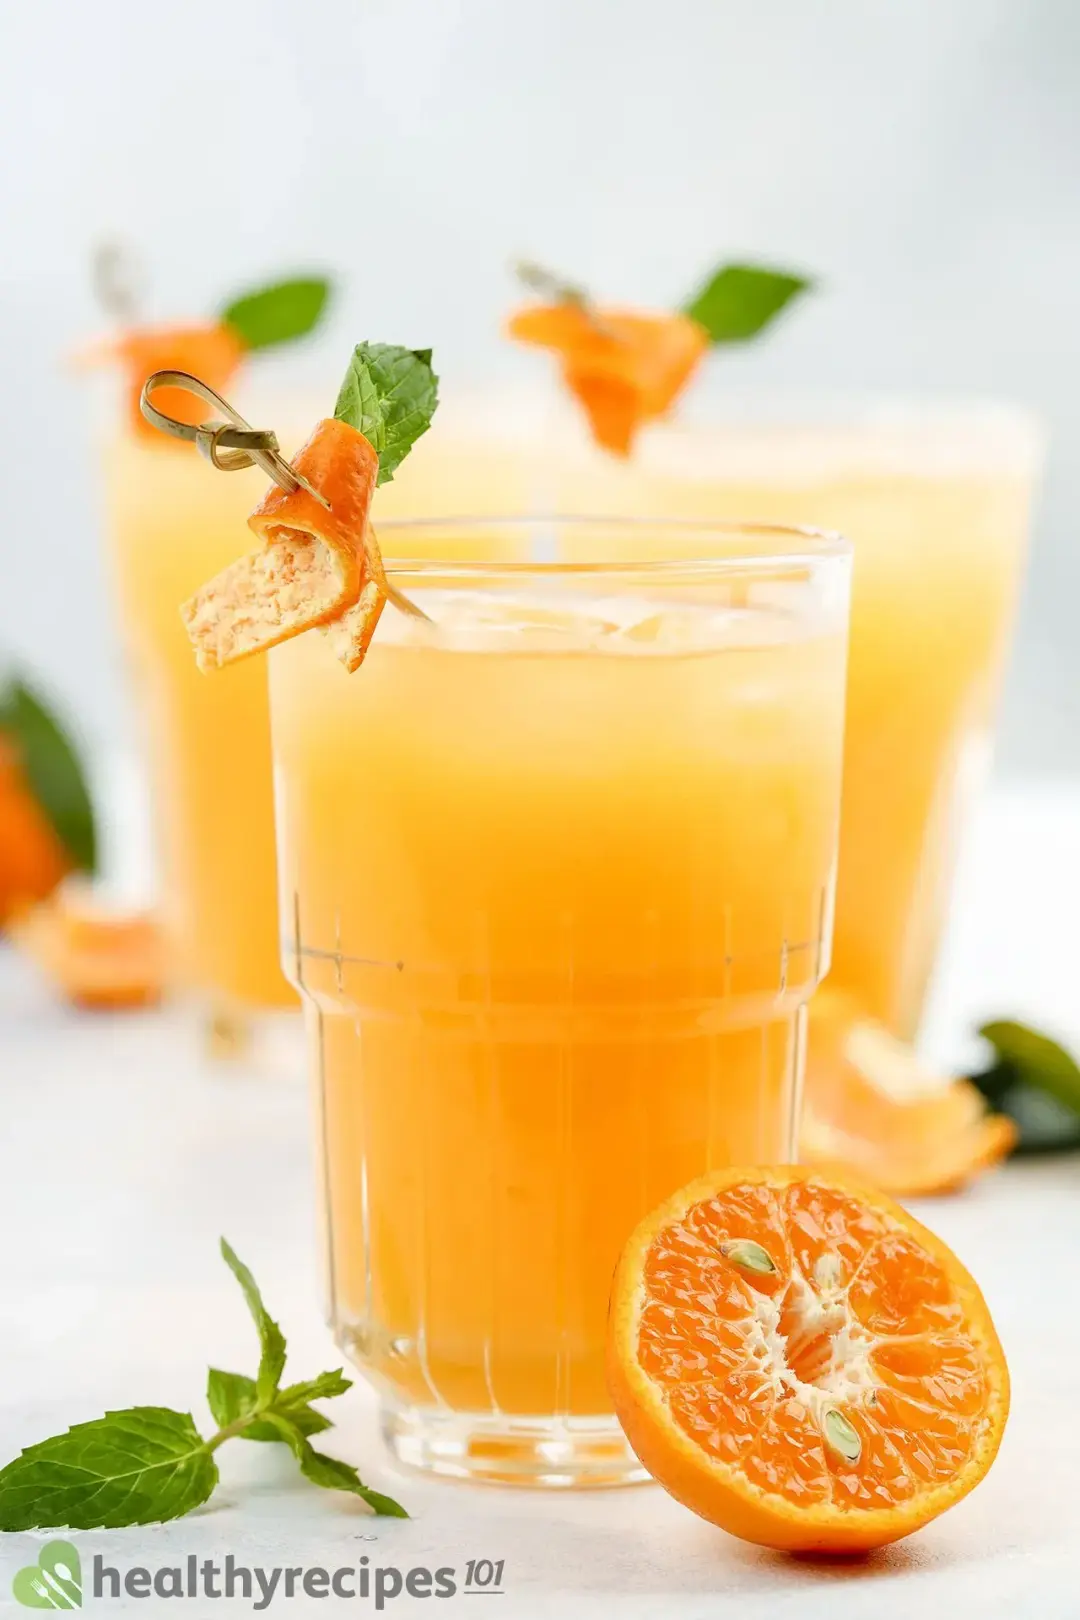 Tangerine Juice Recipe: A Tasty Drink to Keep in the Fridge All Summer